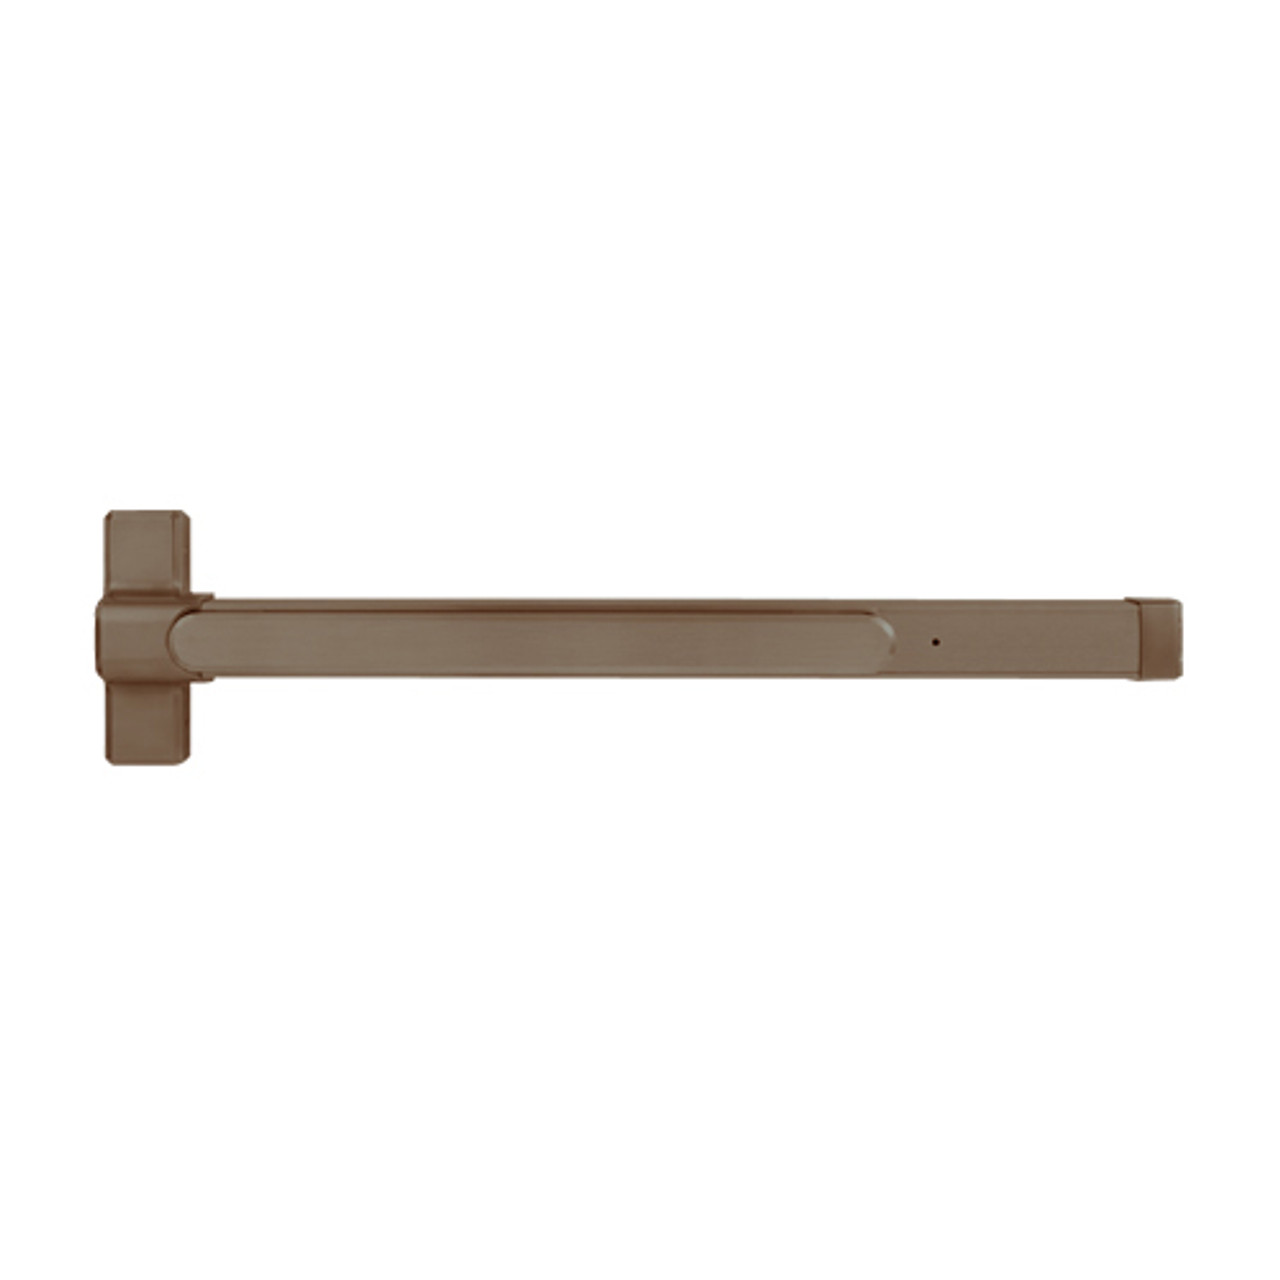 QED127LRX-48-7-313AN Stanley QED100 Series Heavy Duty Concealed Vertical Rod Hex Dog Exit Device in Anodized Duranodic Bronze Finish